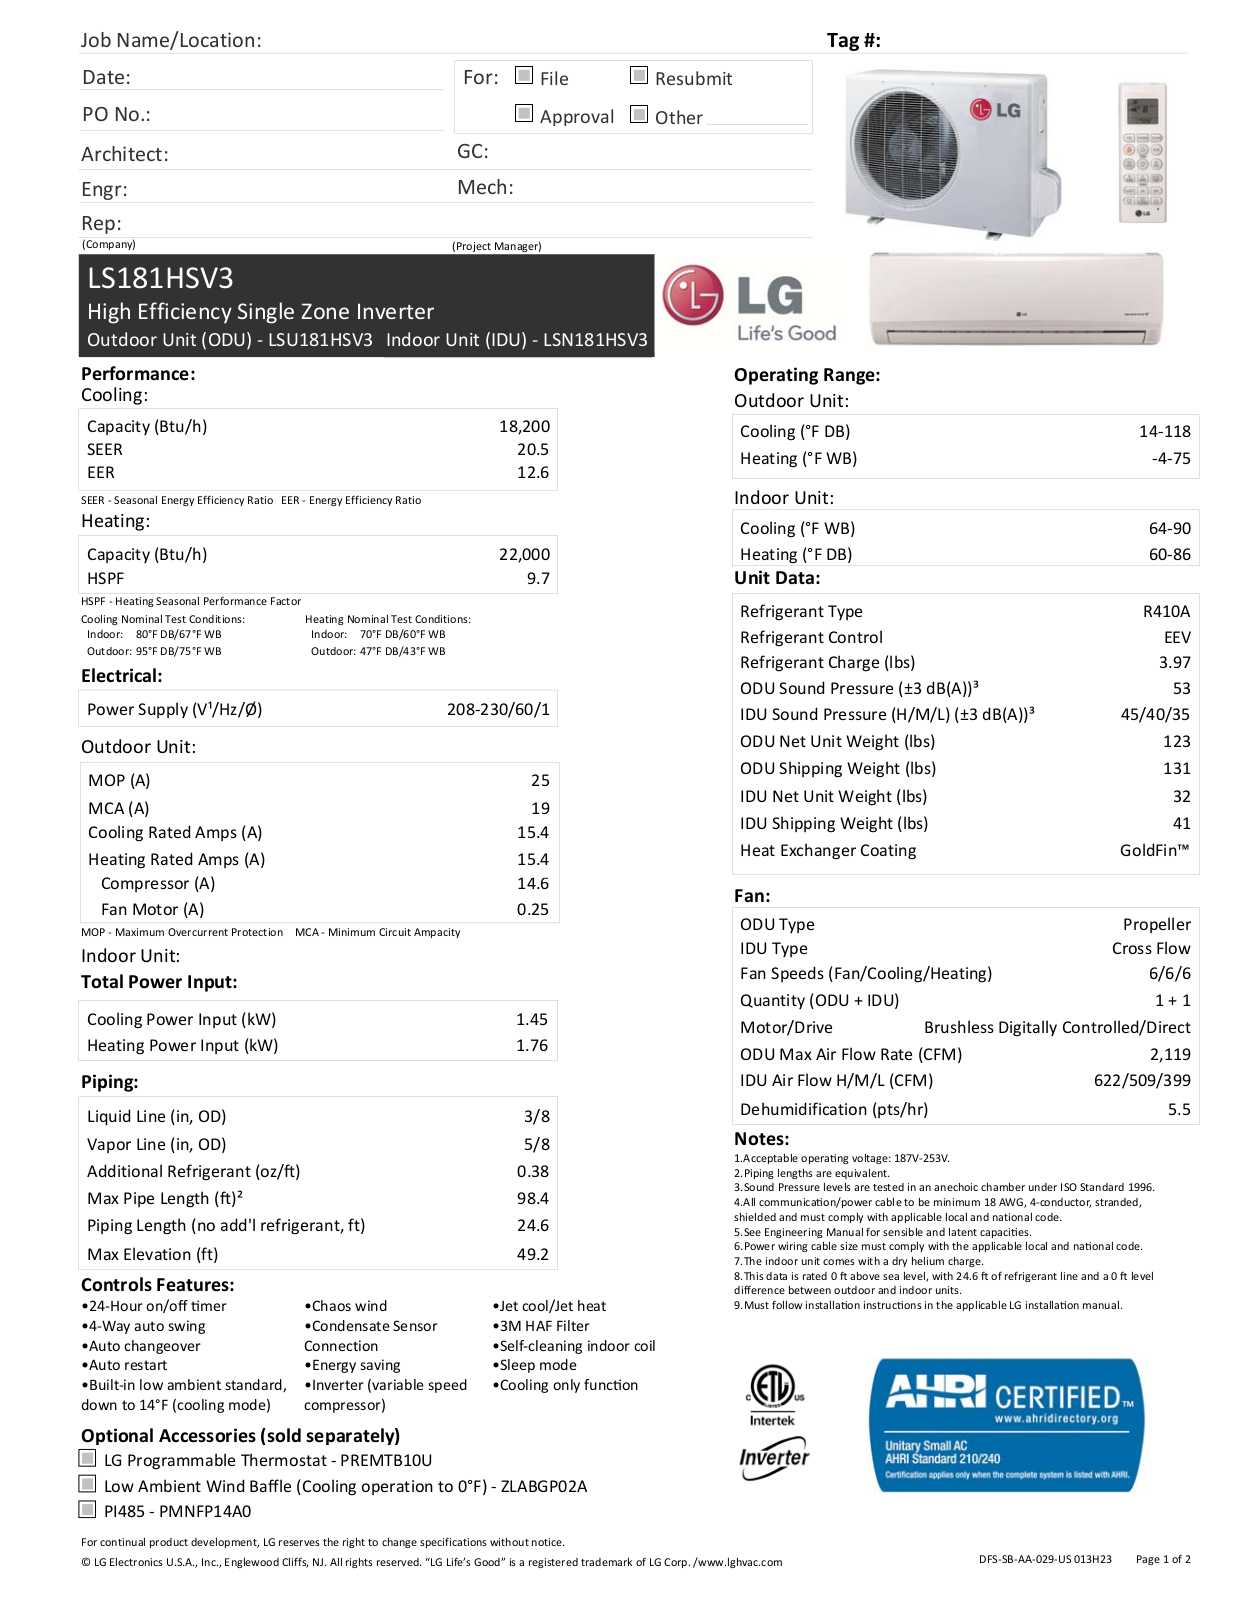 LG LS181HSV3 Specifications